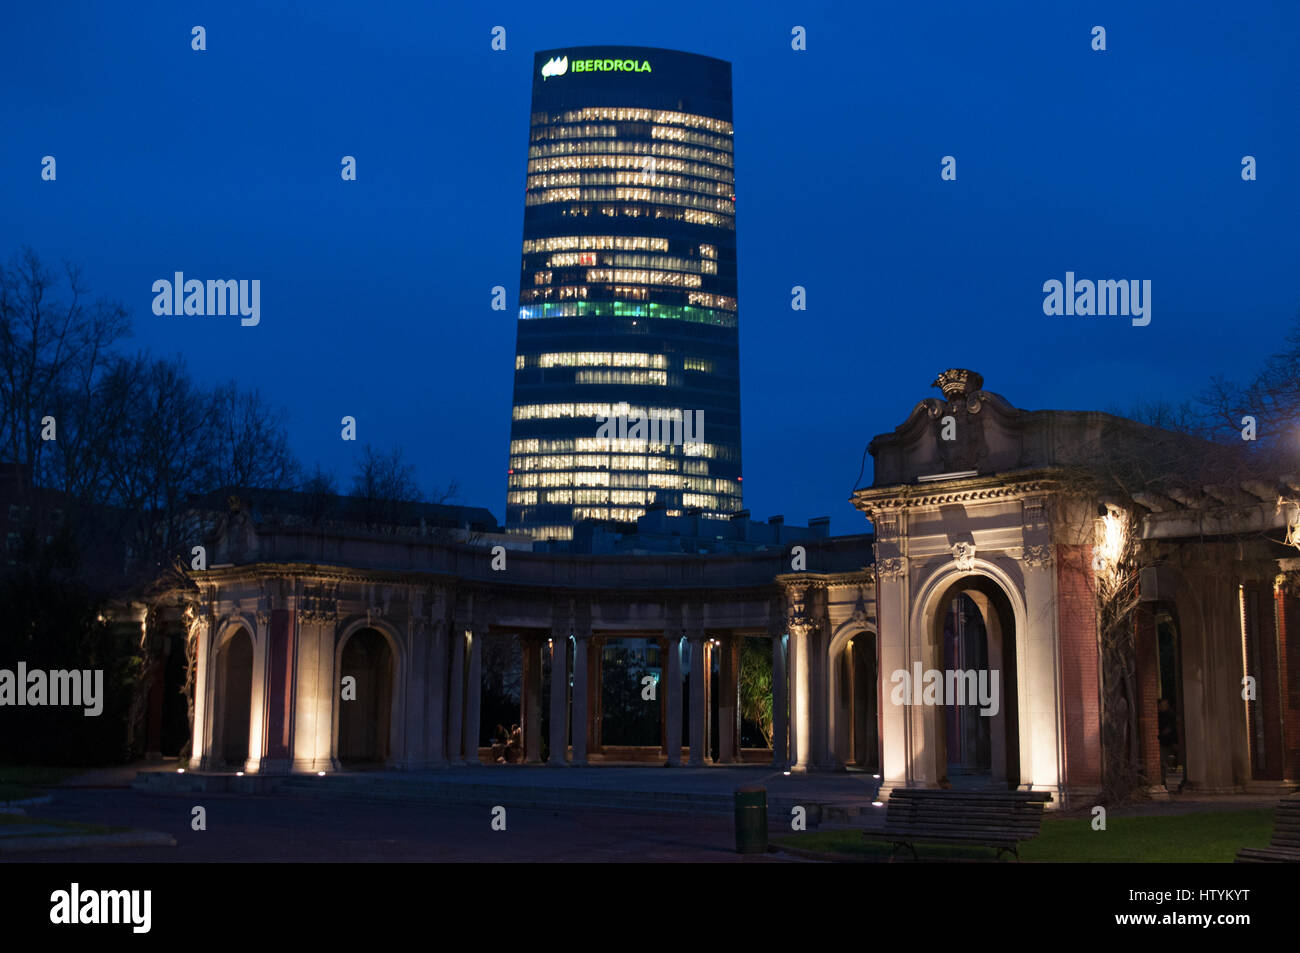 Bilbao: the Iberdrola Tower, headquarter of the electricity company designed by Cesar Pelli, the tallest building in the Basque Country, seen at night Stock Photo